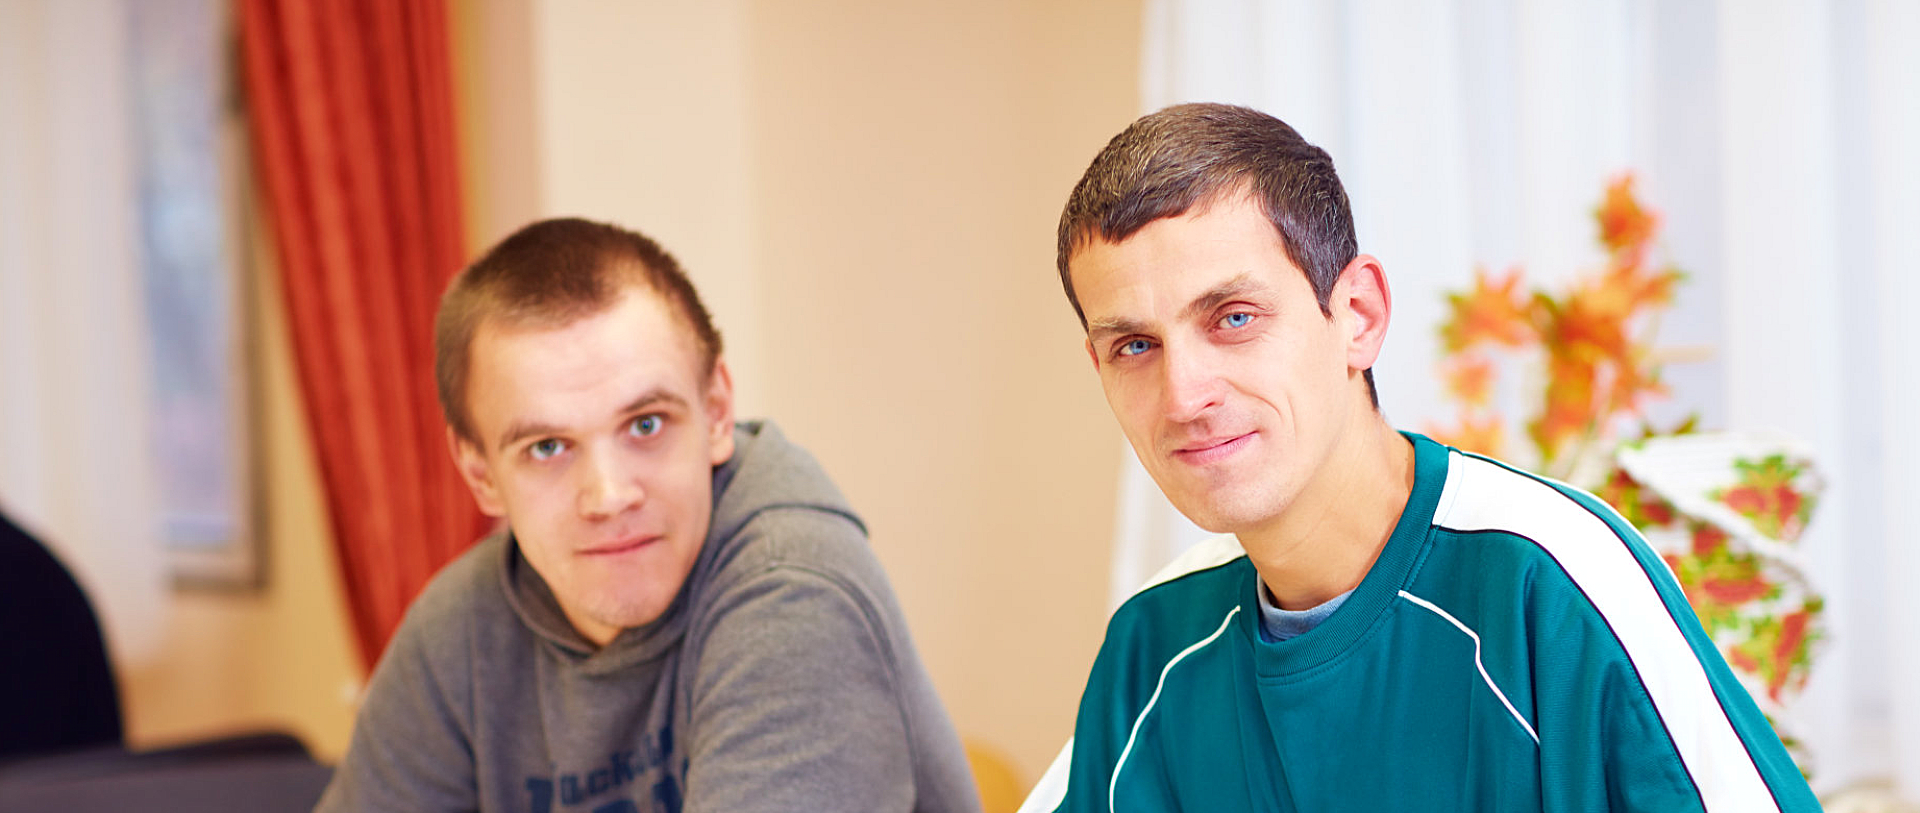 two men with disability smiling